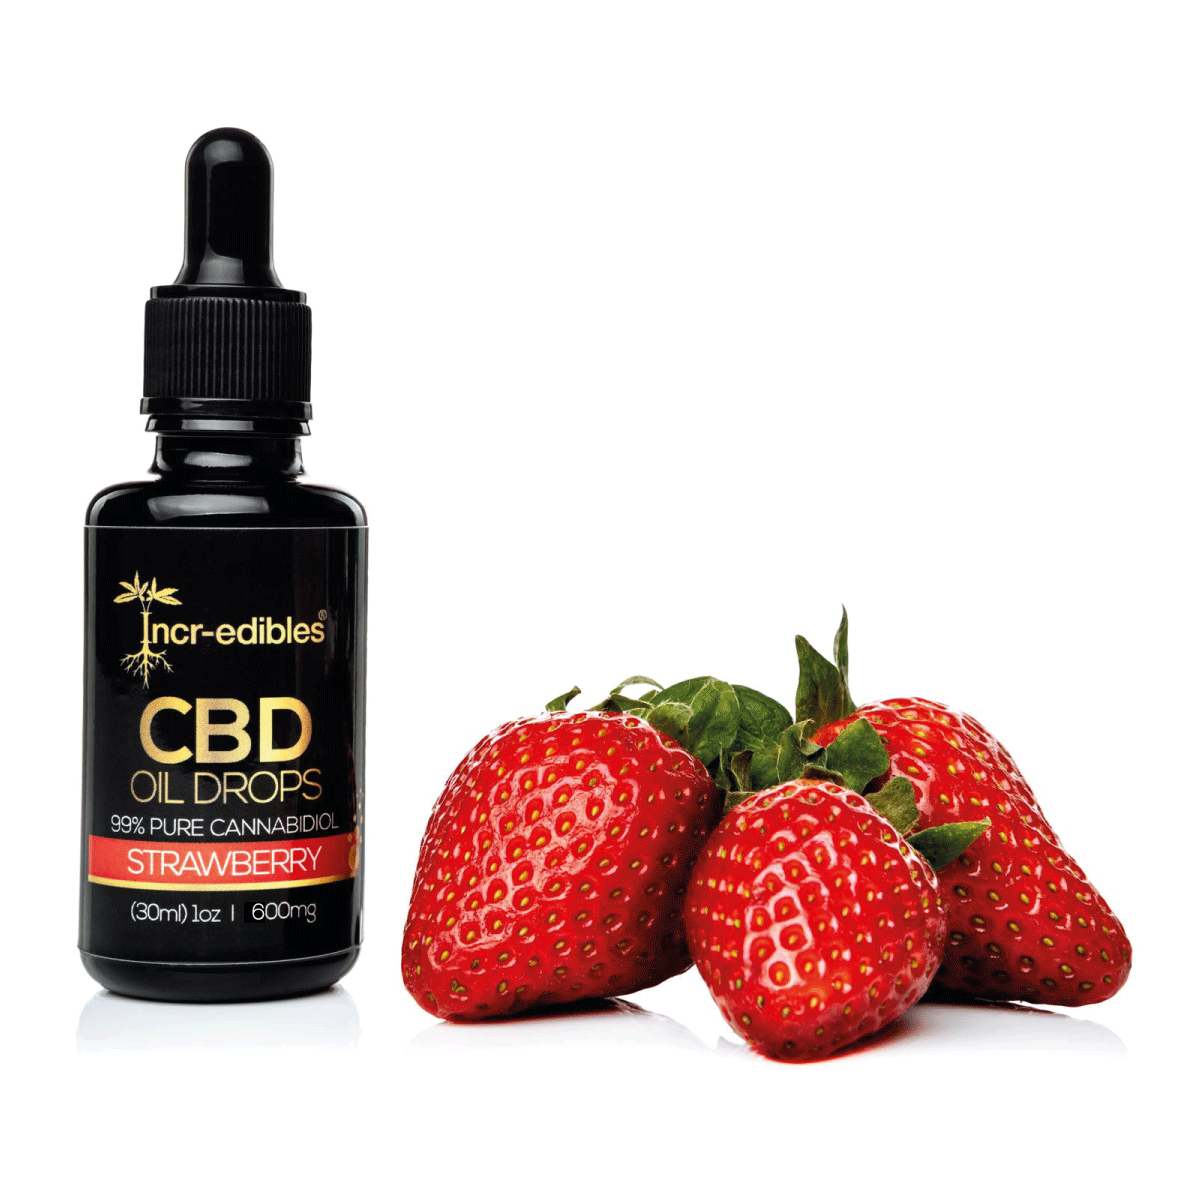 1 x 30ml Bottle of Strawberry Flavoured CBD by Incr-edibles pictured with 3 large juicy strawberries